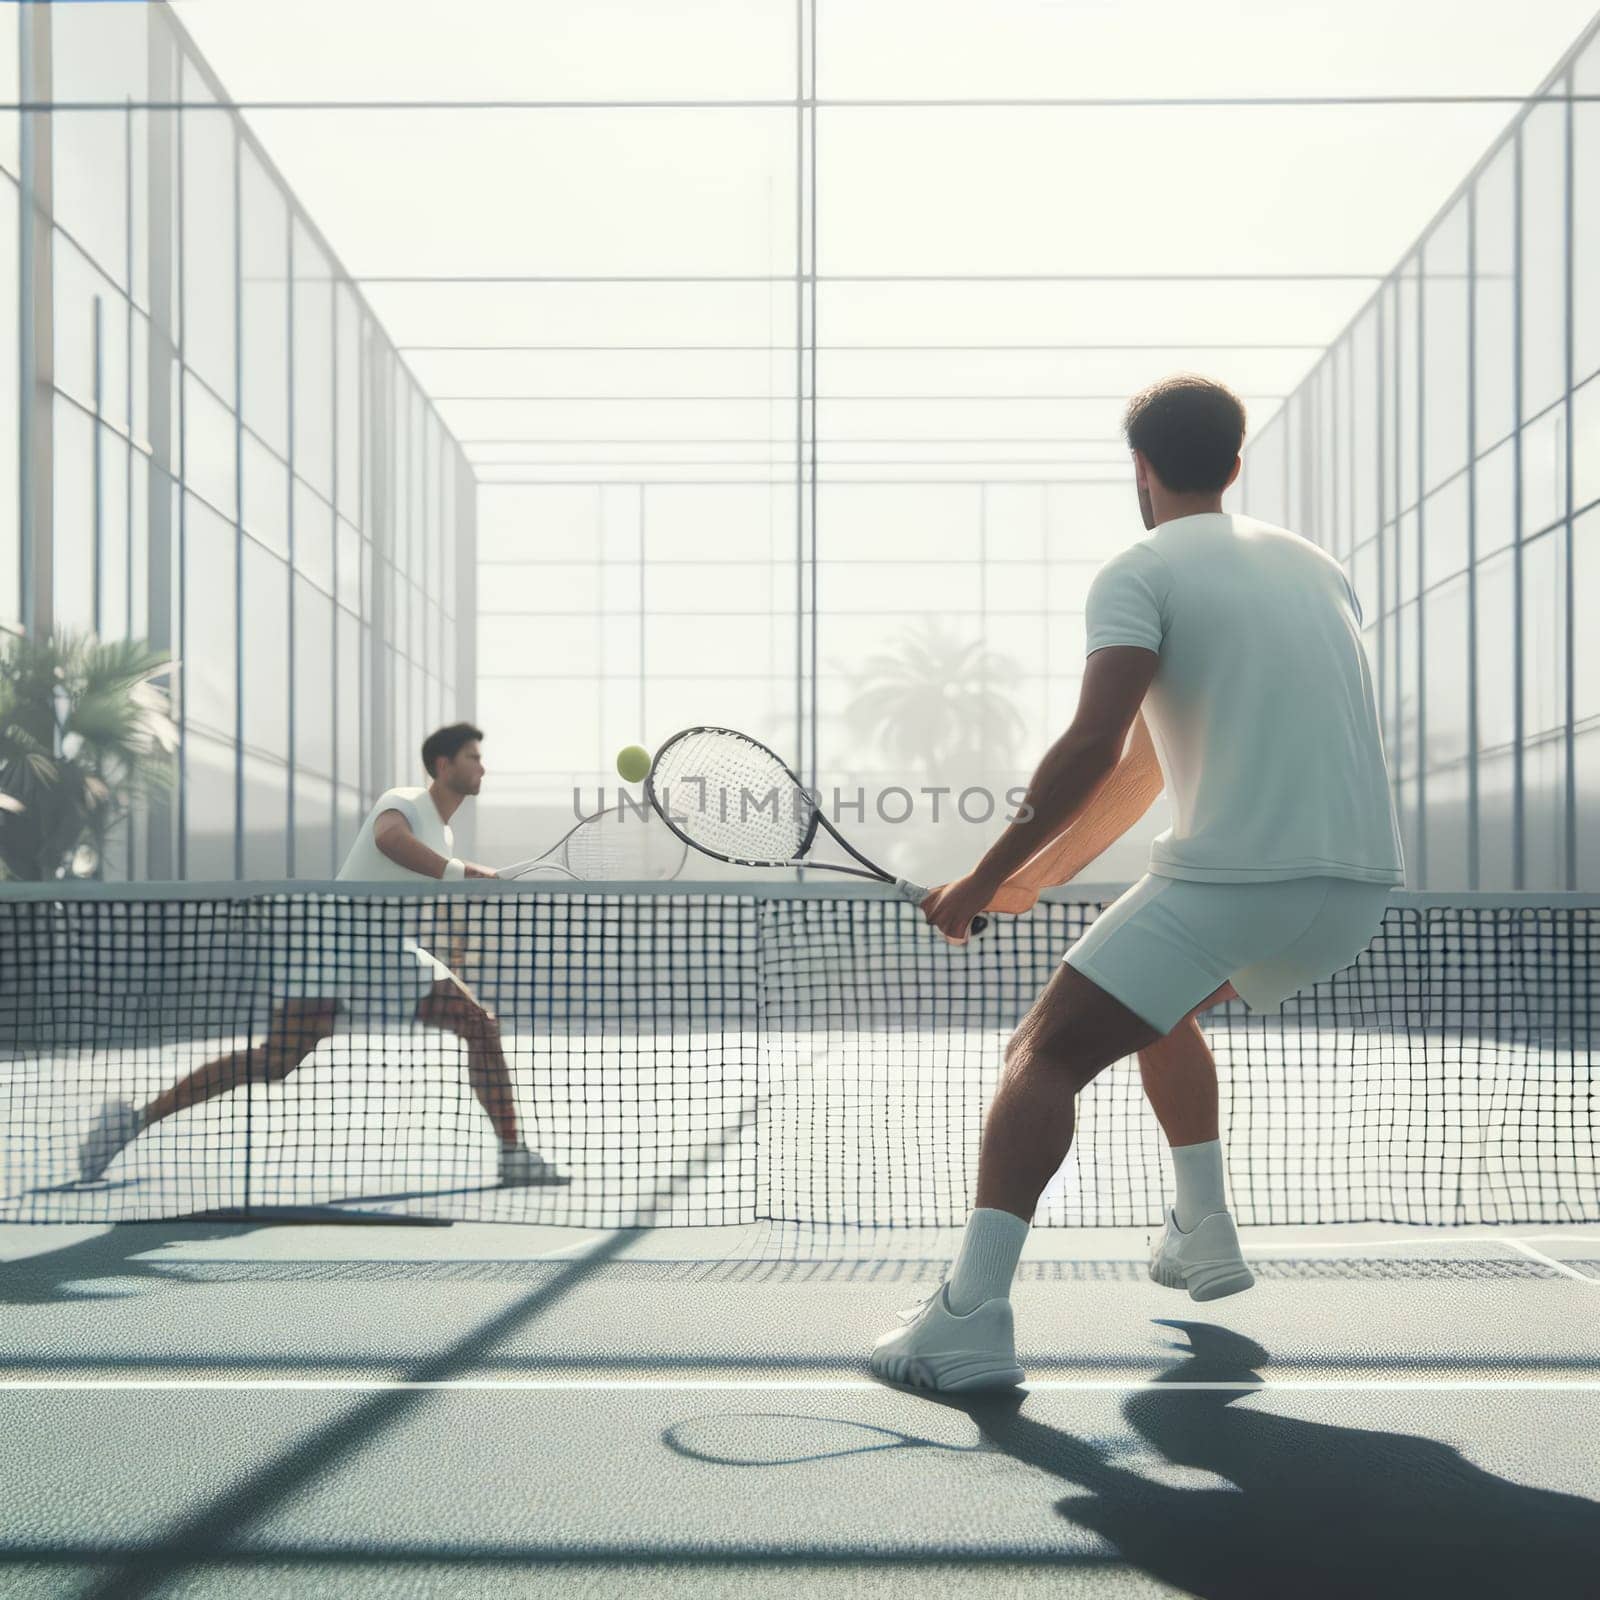 Two men engaged in a tennis match on an indoor court, palm trees in the background